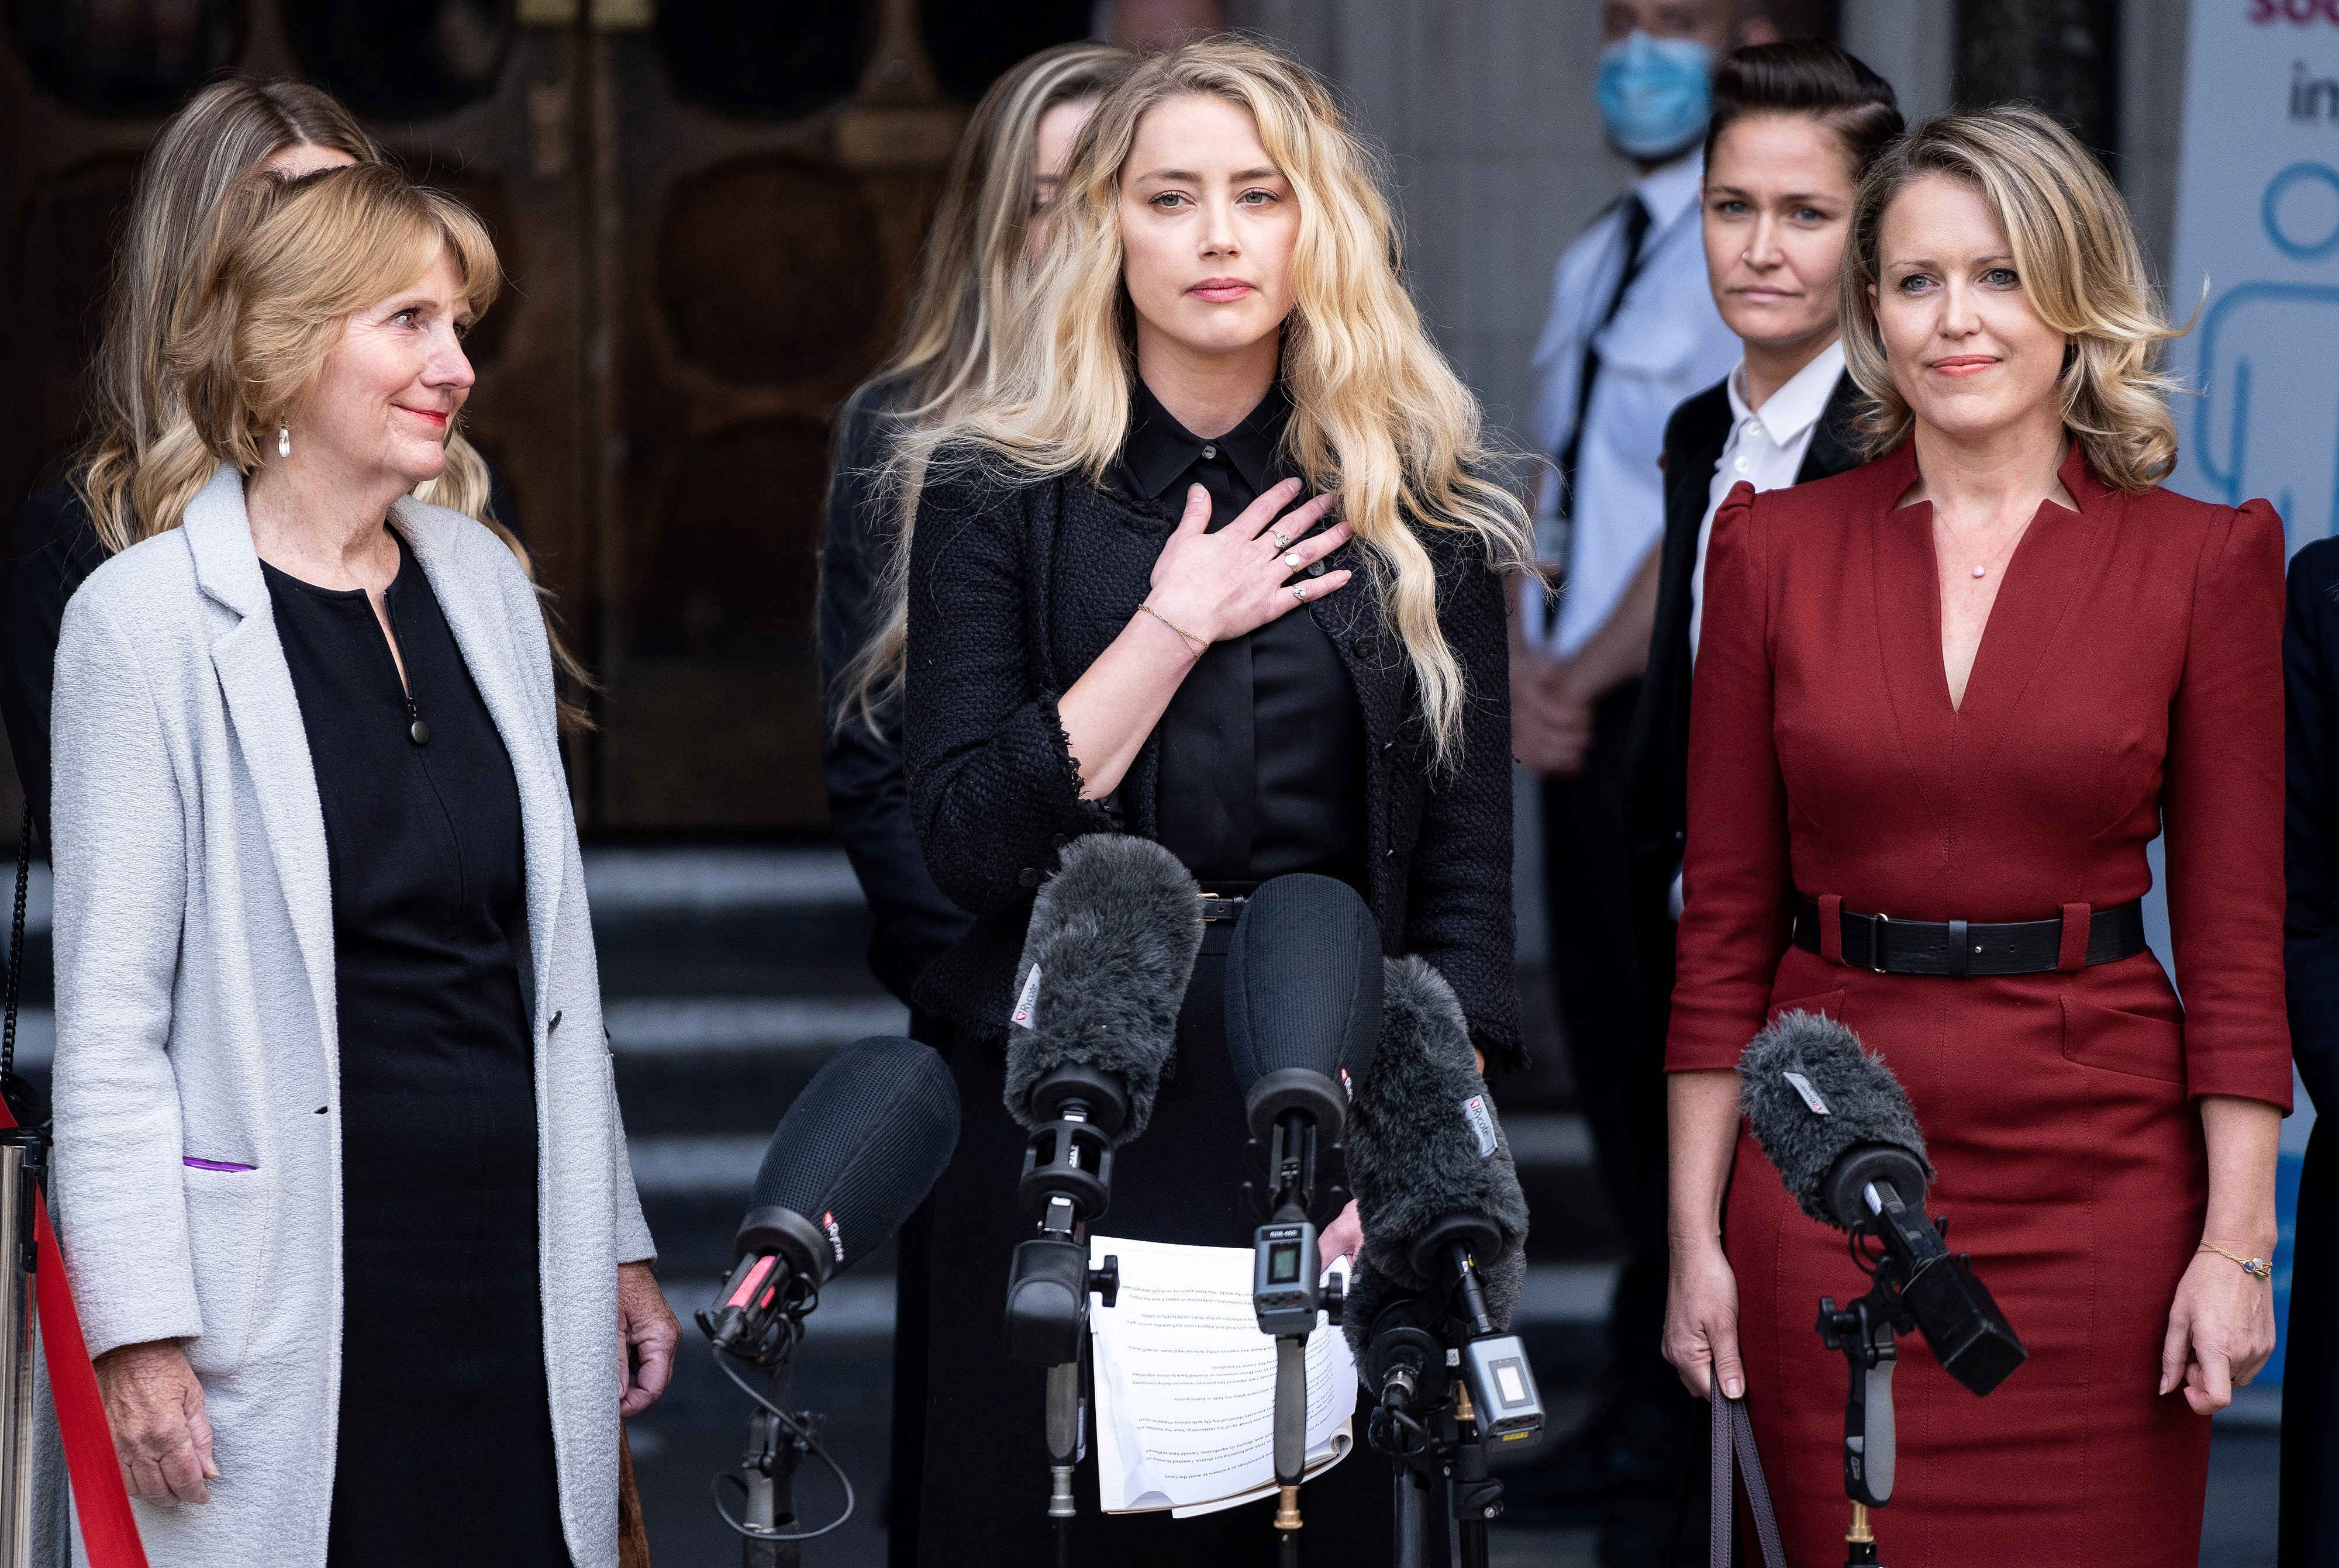 Amber Heard makes a statement as she leaves court after the final day of the libel trial by Johnny Depp against News Group Newspapers in London on 28 July 2020